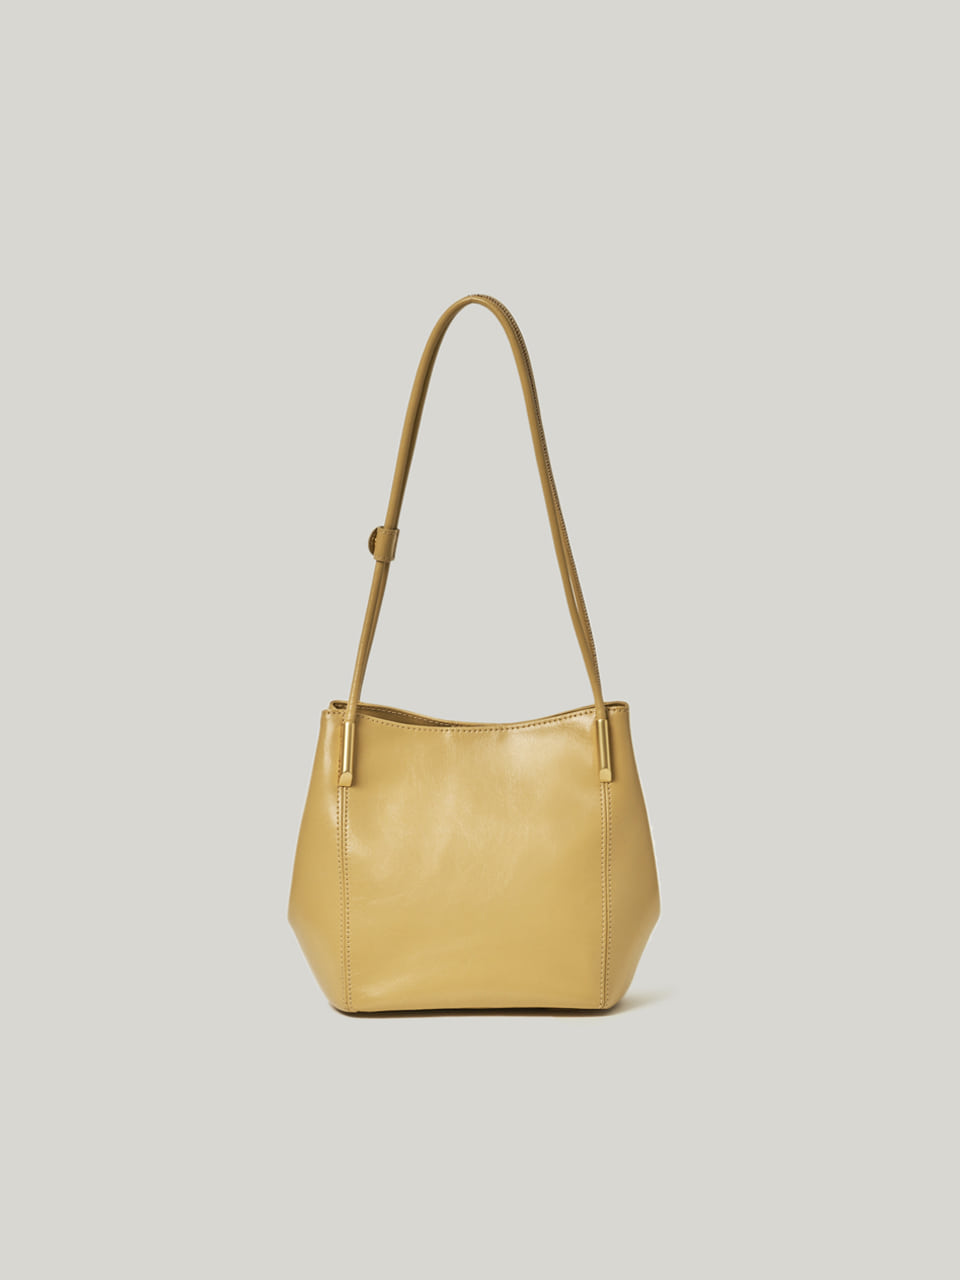 Marron Bag / Bisque Yellow (2nd Reorder)